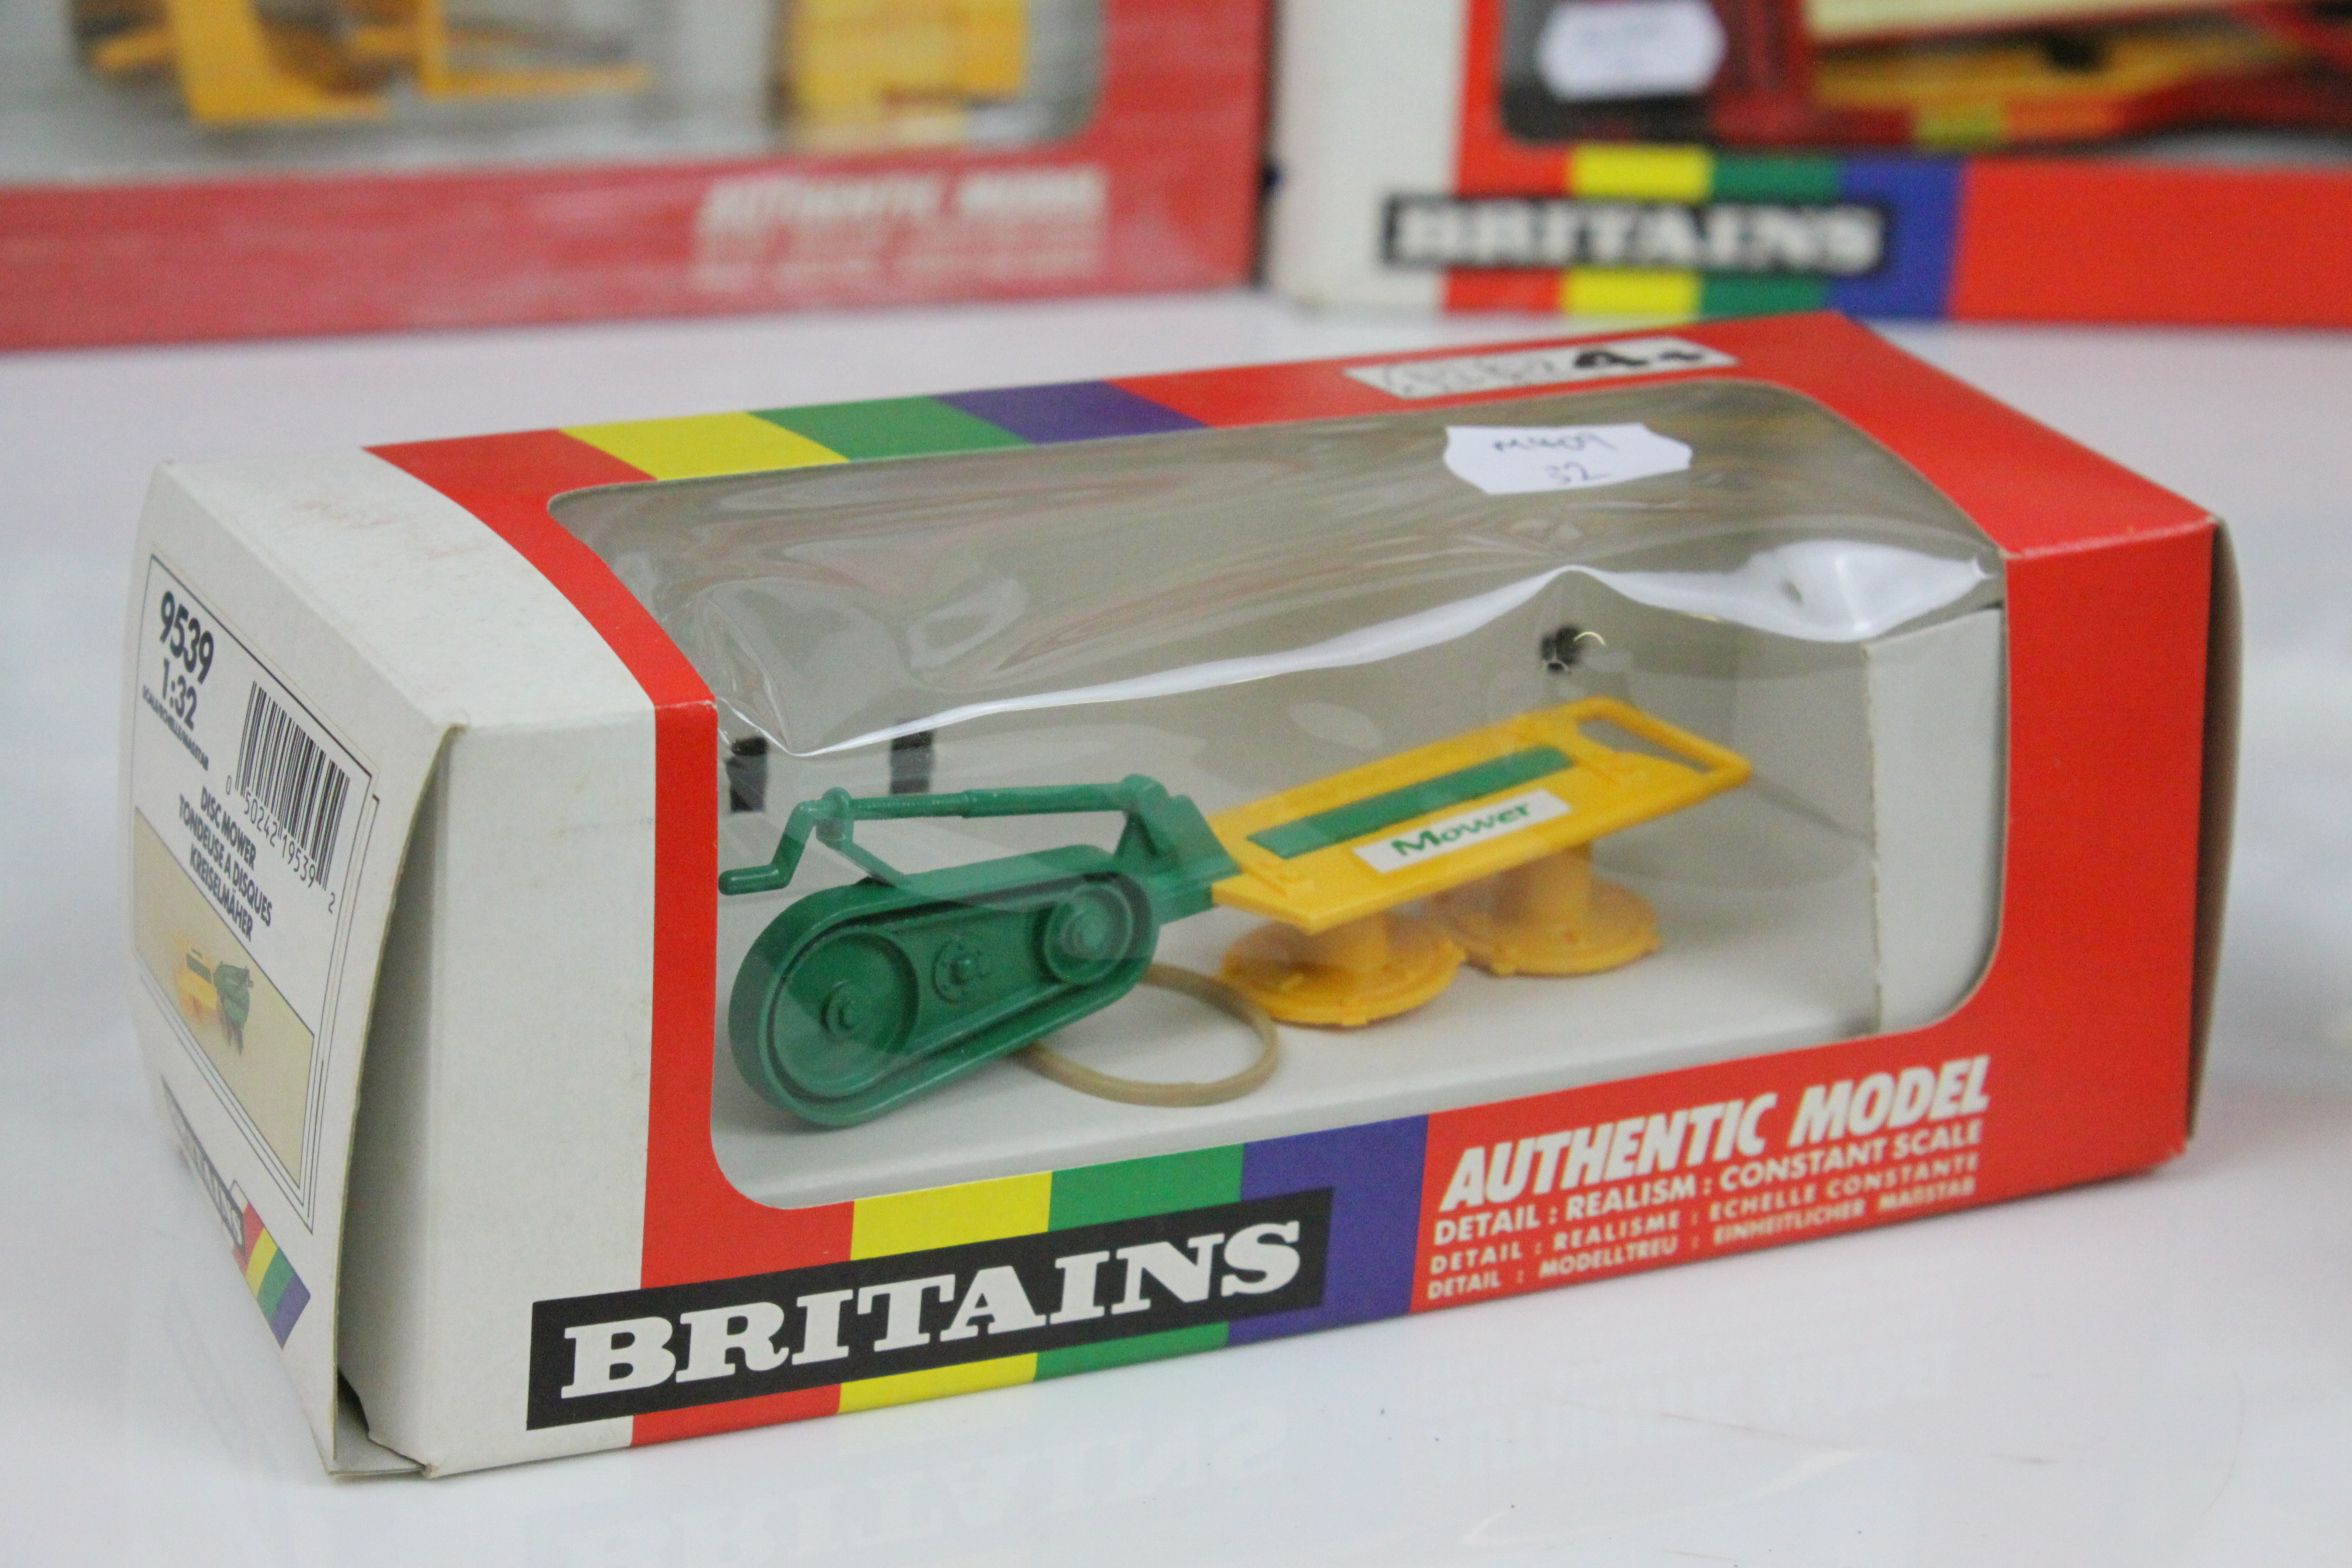 16 Boxed 1:32 Britains farming models to include 9566, 9559, 9539, 9548, 9547, 9574, 9509, 9519, - Image 7 of 27